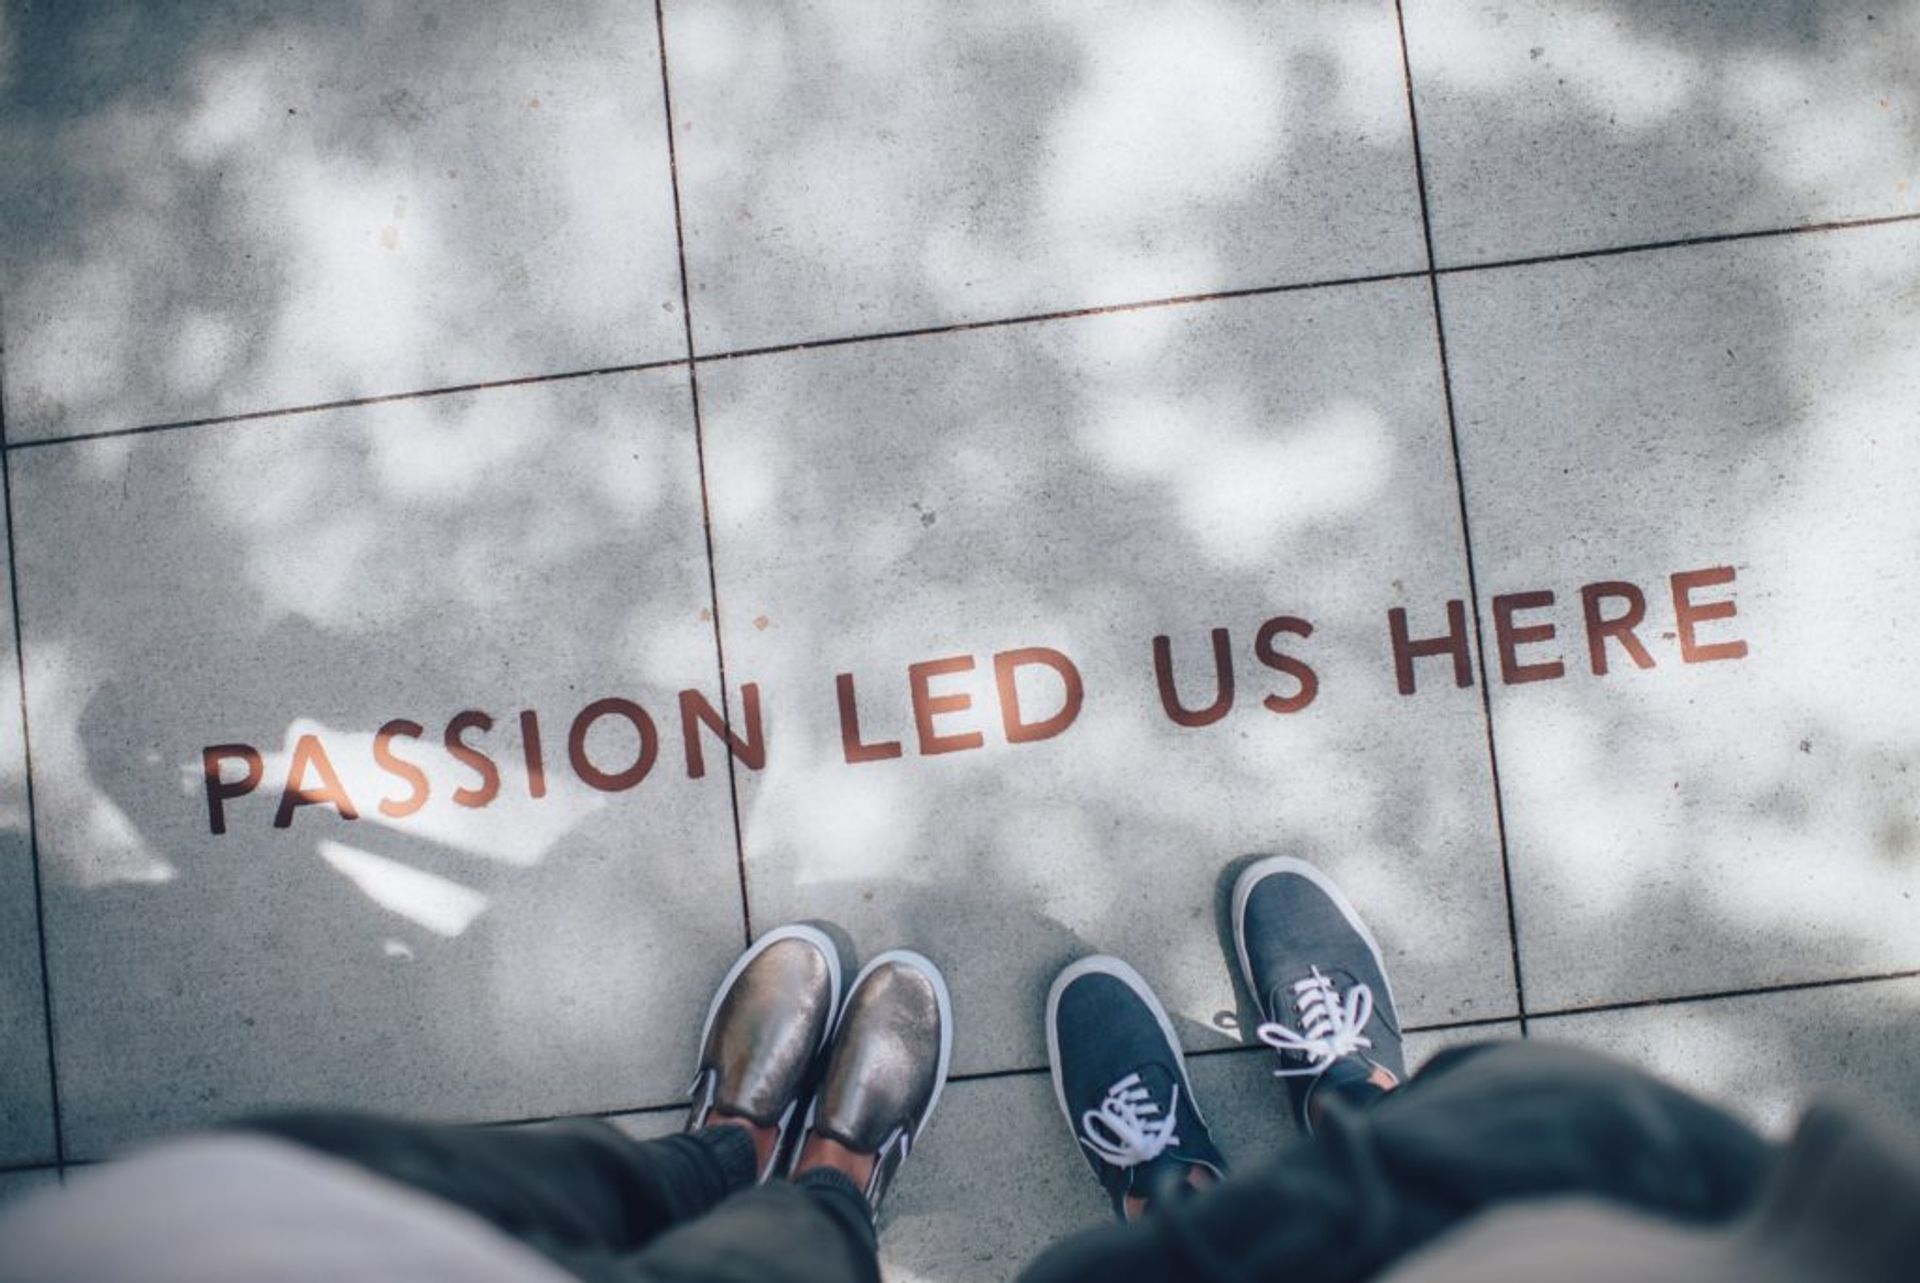 People standing on a sidewalk, the text on the sidewalk reads 'Passion led us here'.